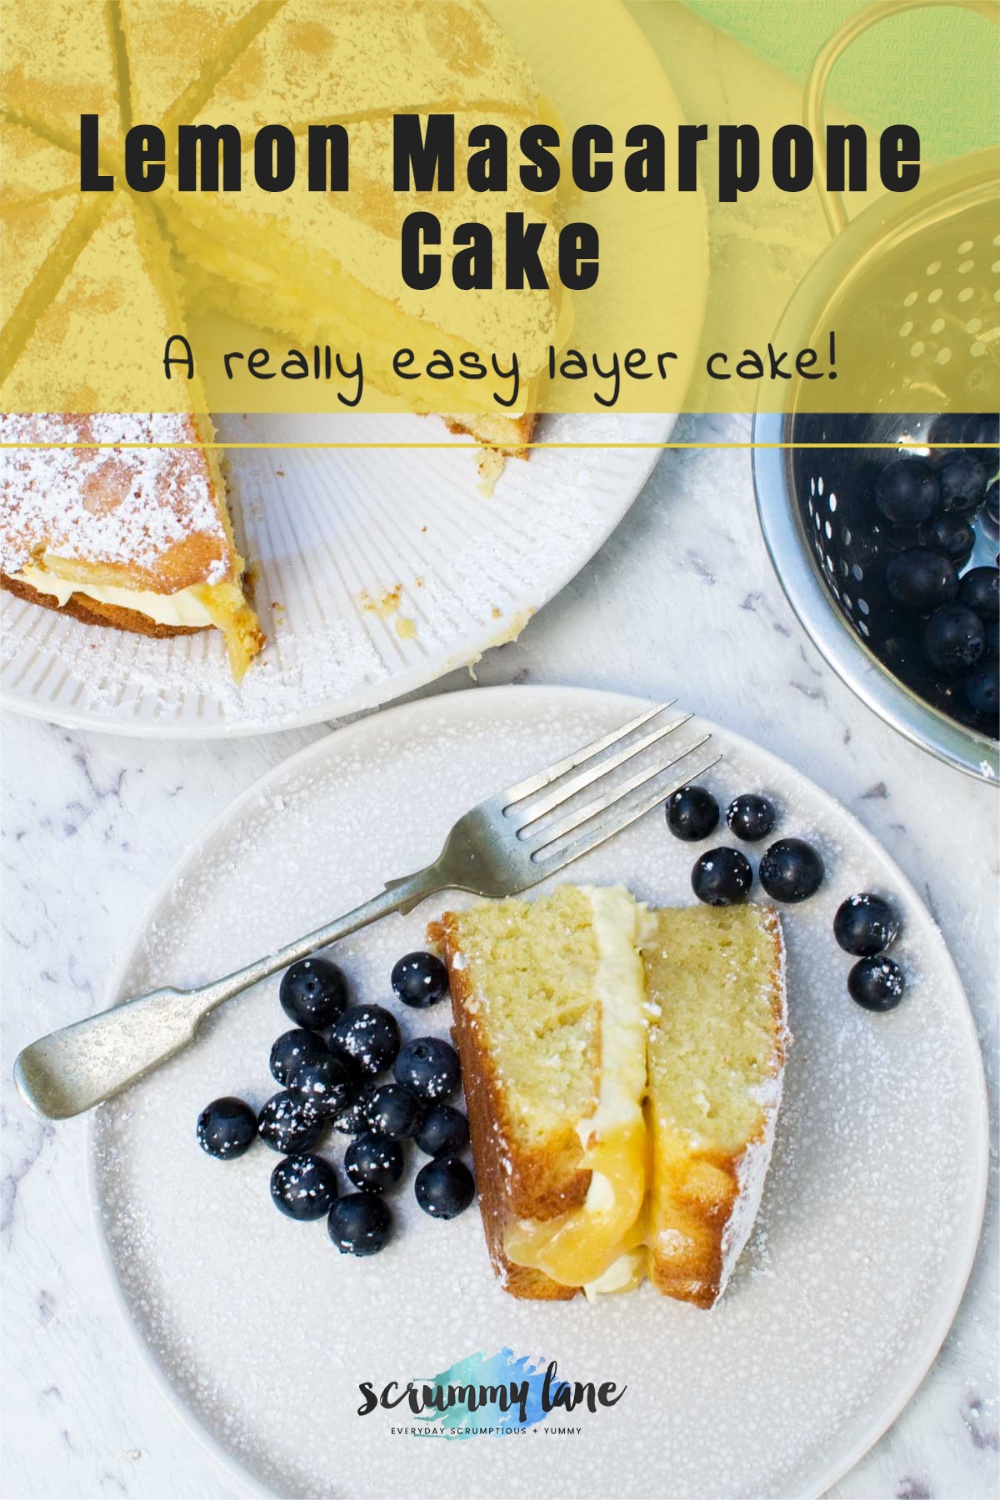 A piece of lemon mascarpone cake from above with a title on for Pinterest